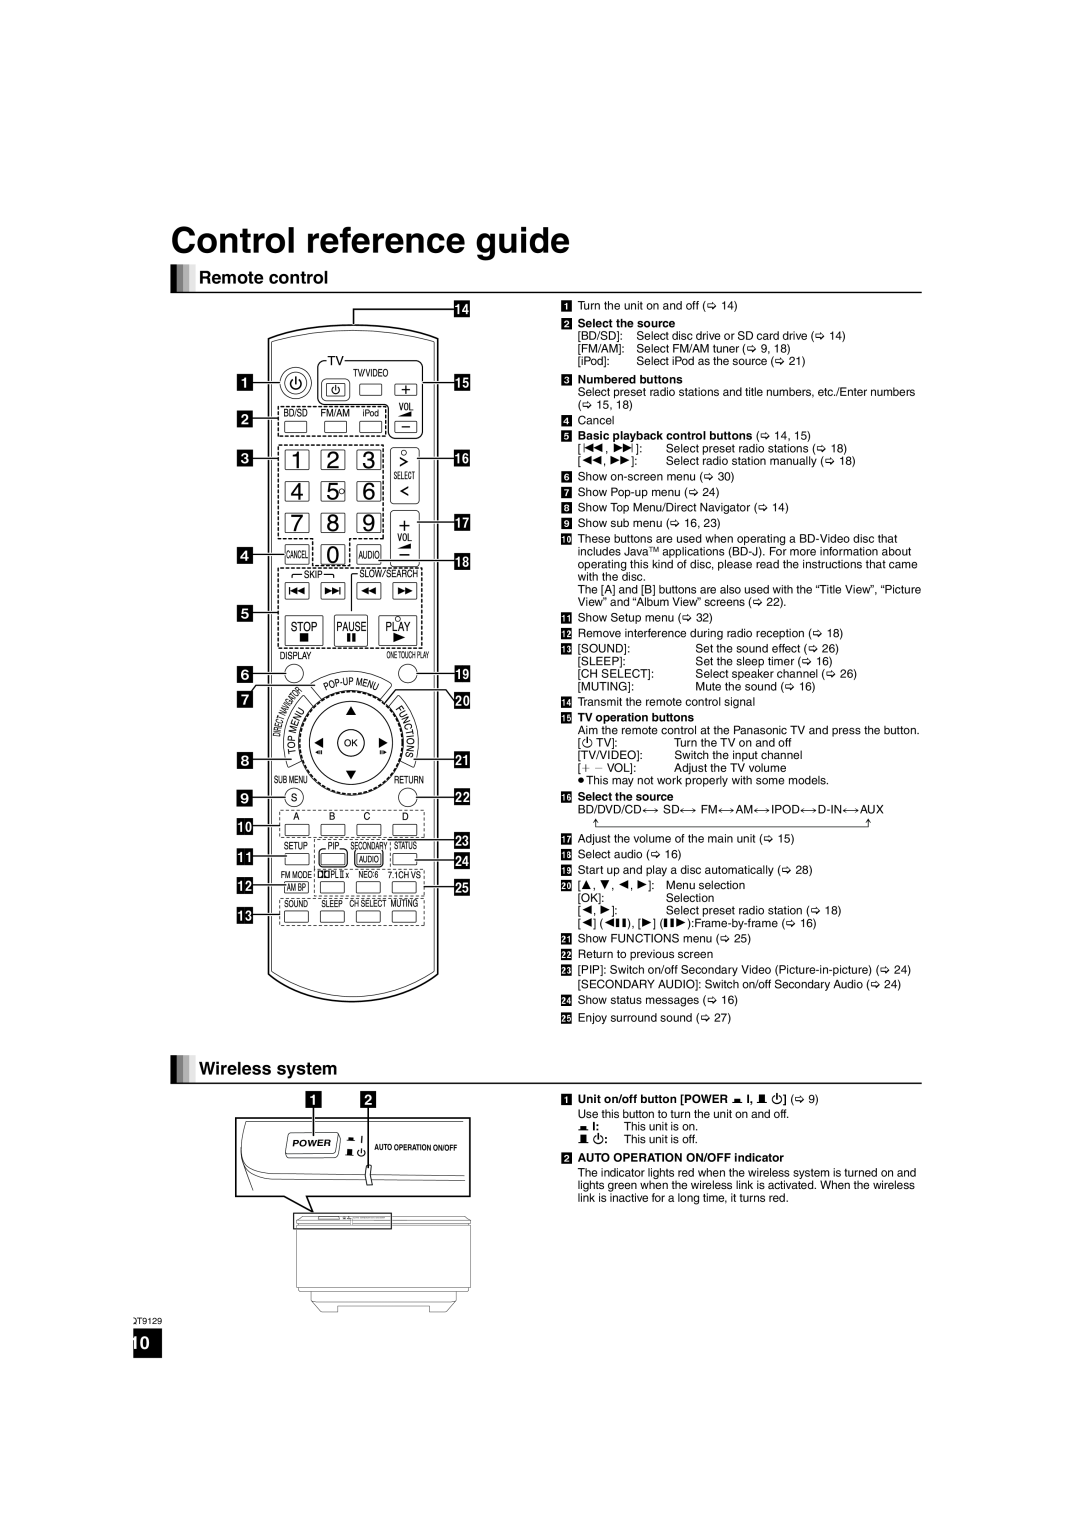 Panasonic SC-BT100 warranty Control reference guide, Remote control, Wireless system 